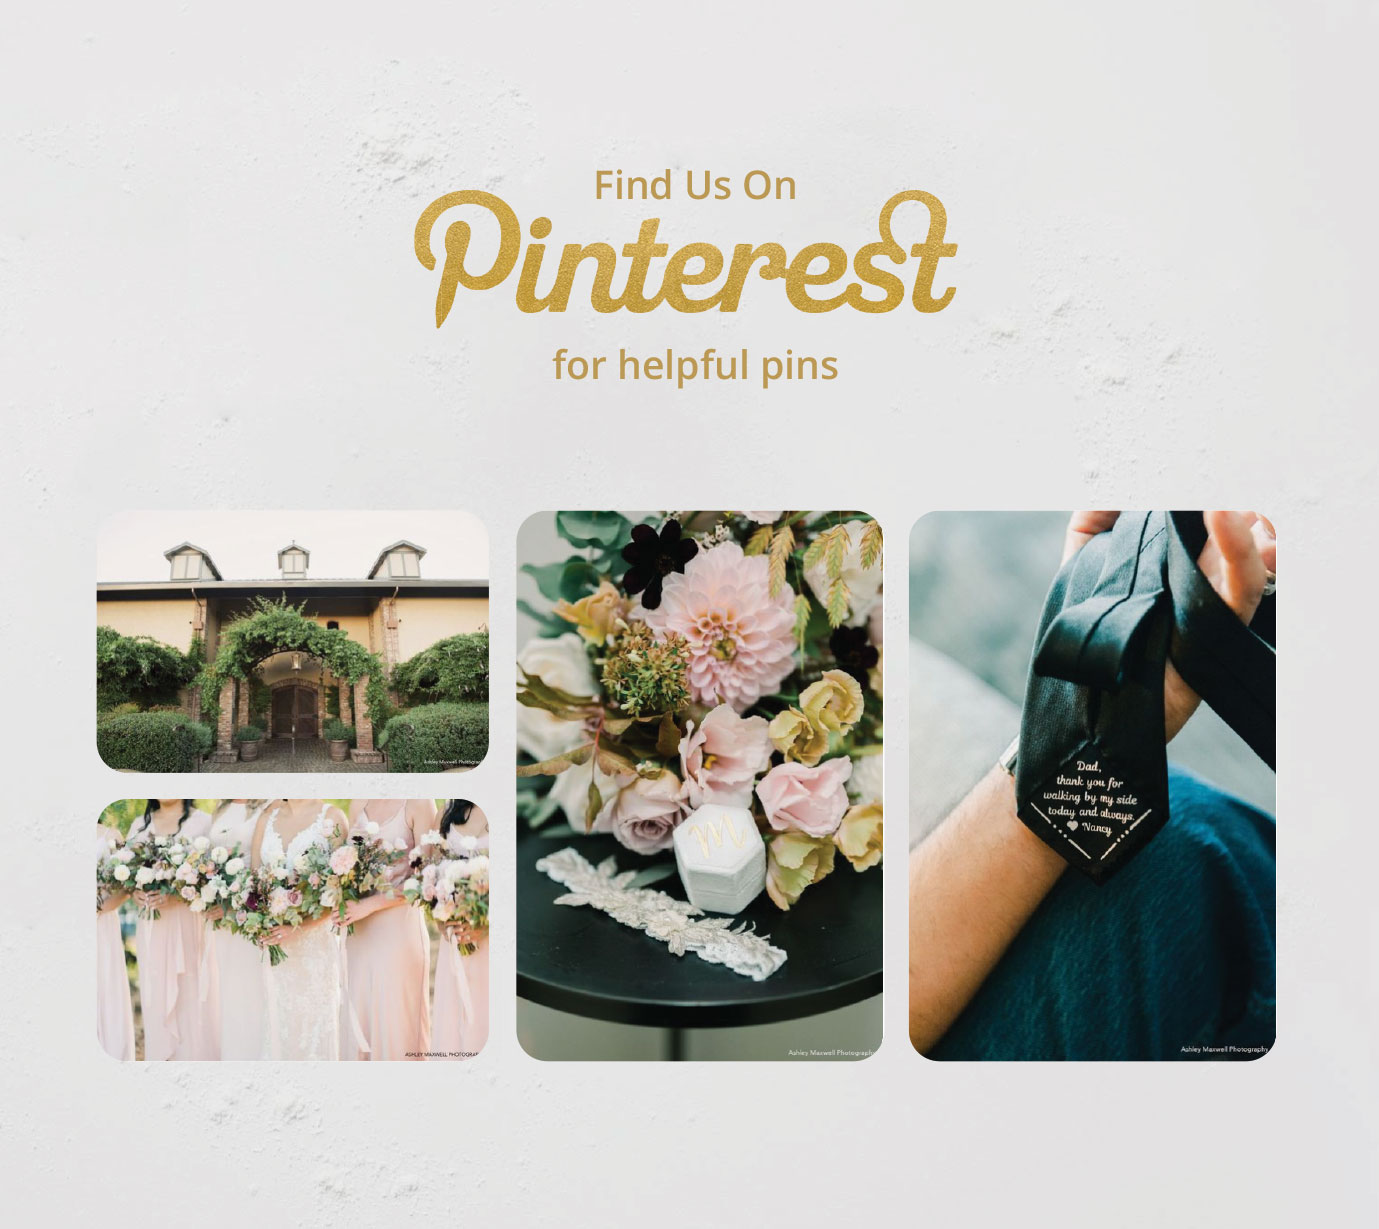 Find Us On Pinterest for helpful pins